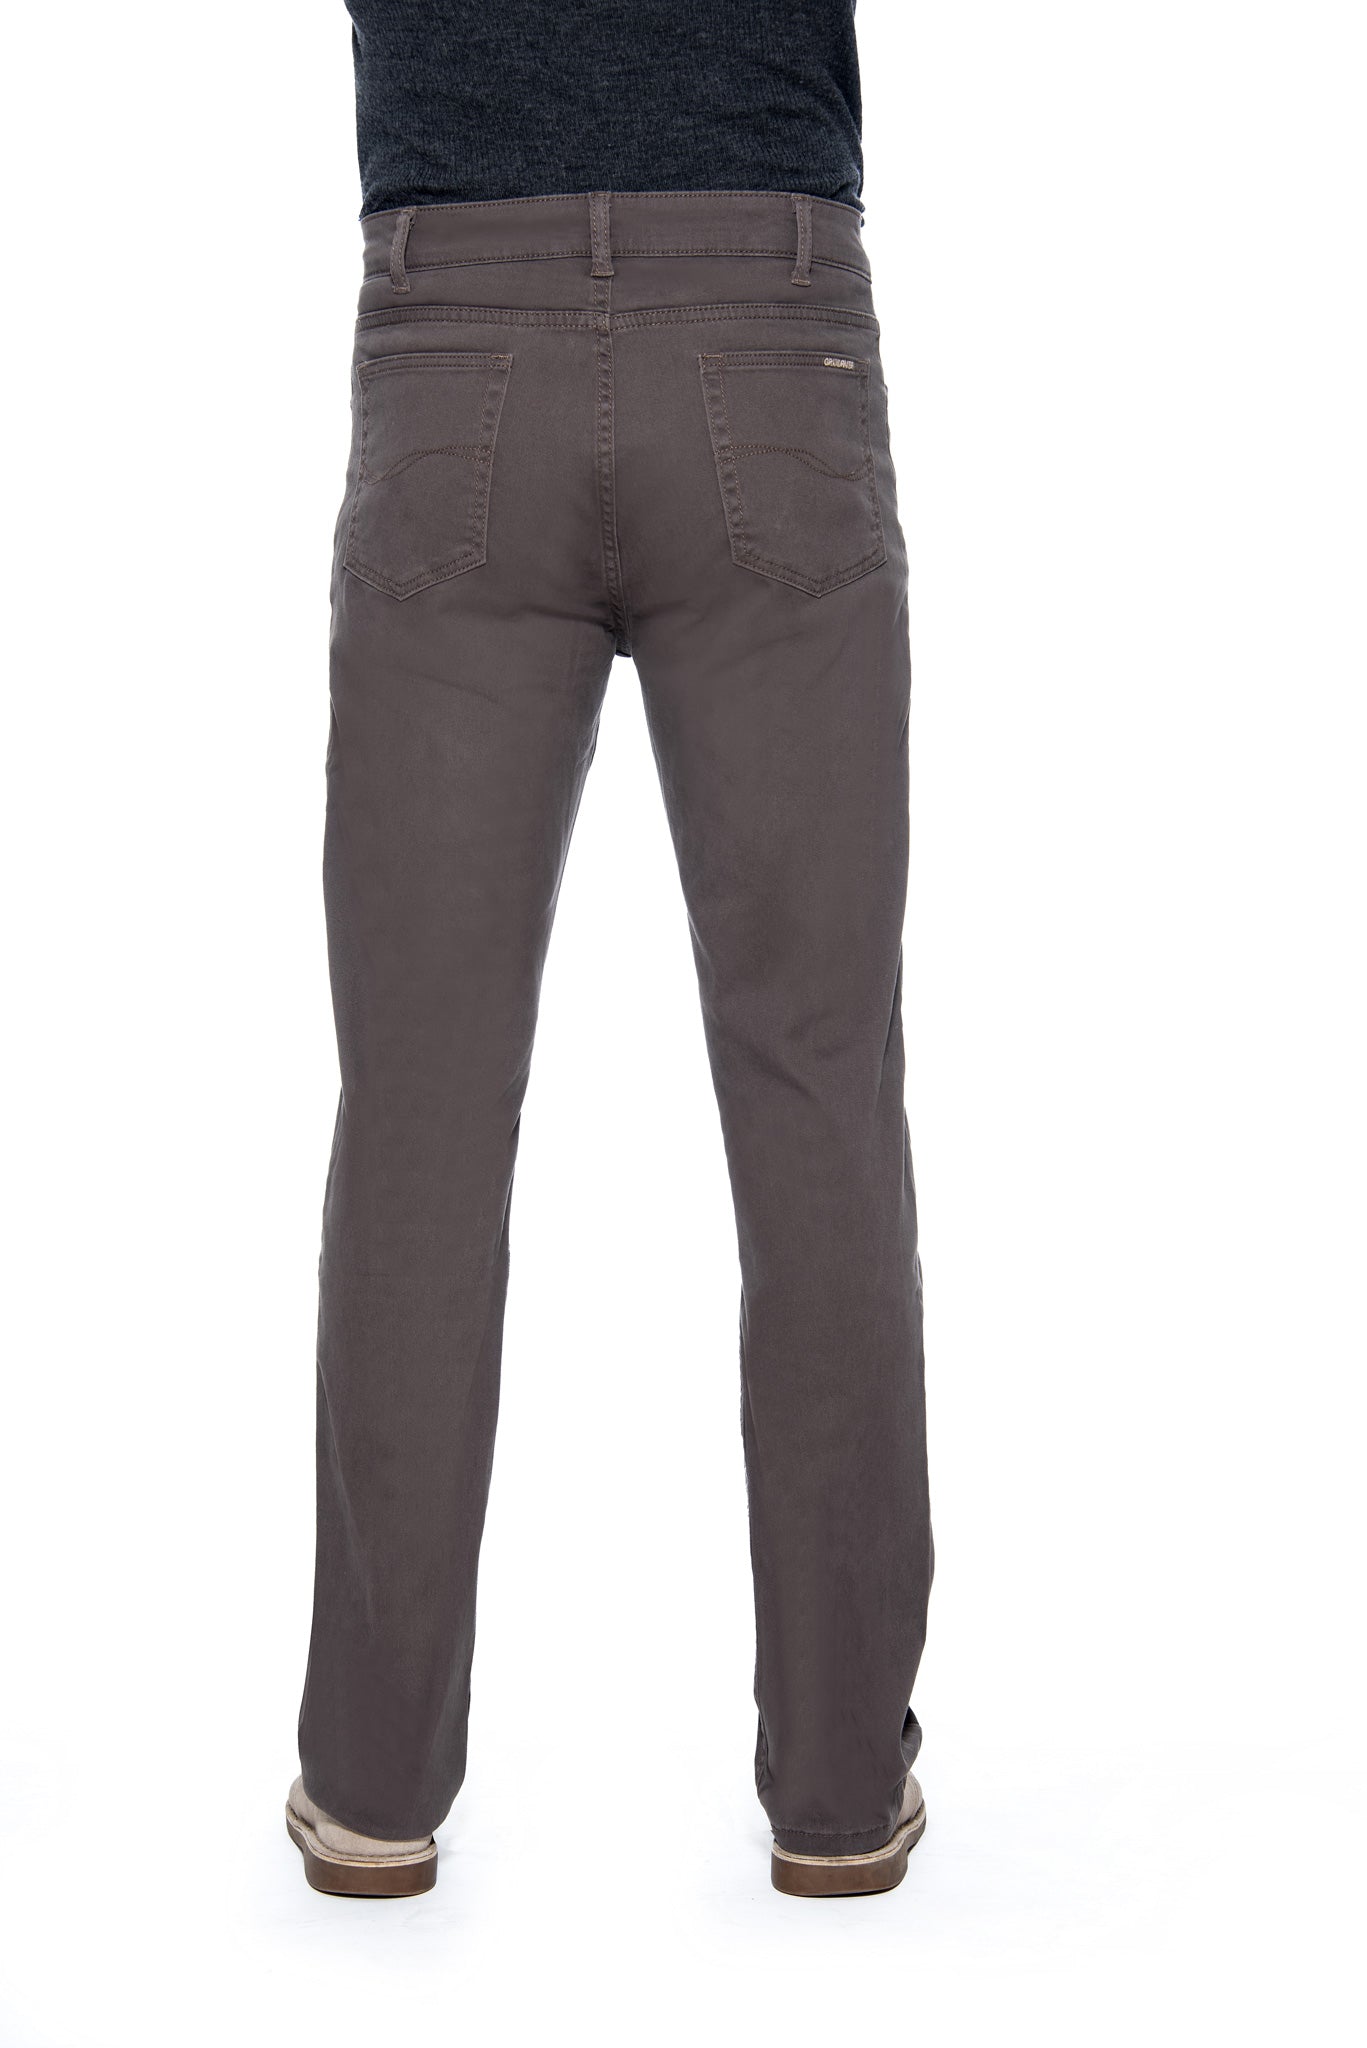 #283BR - Brown Lightweight Stretch Twill Pant